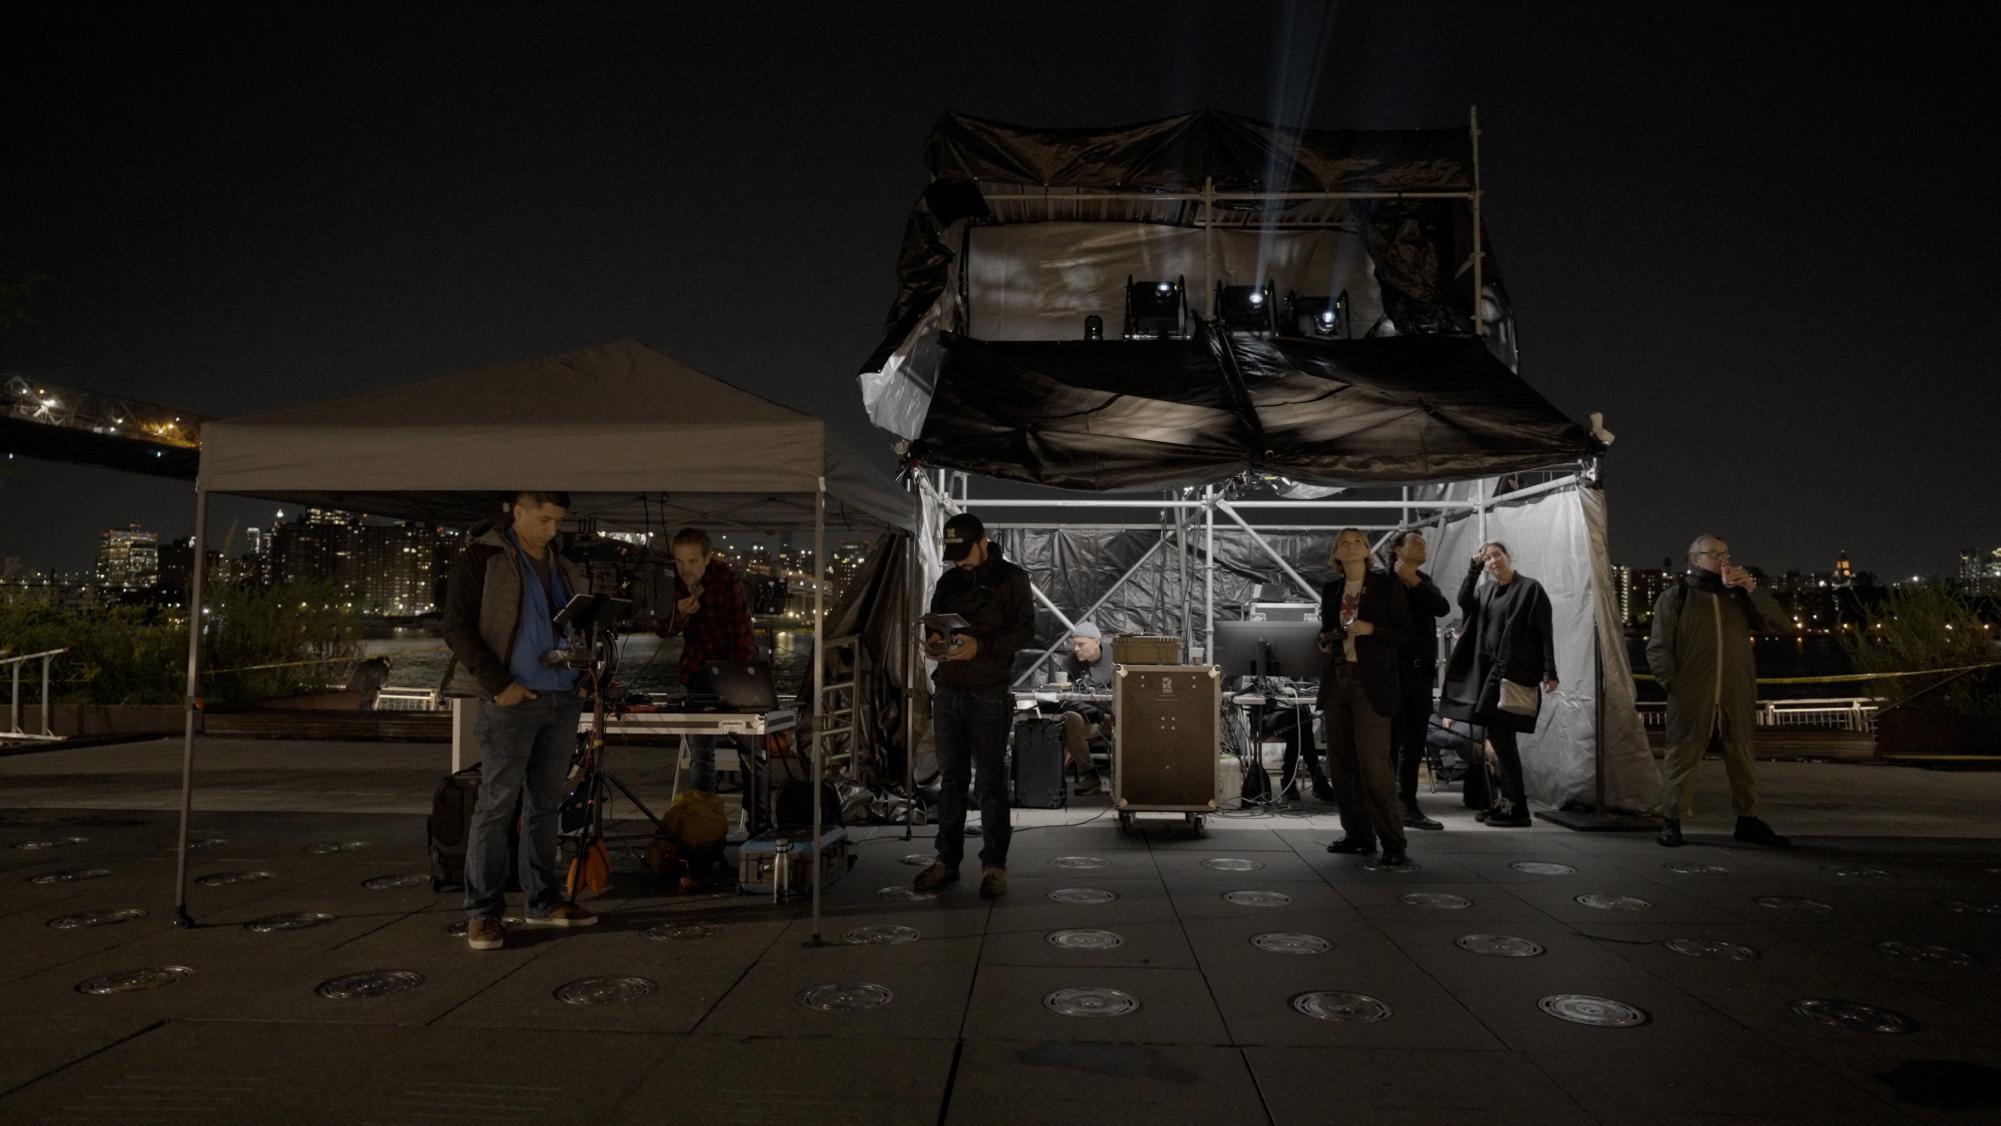 People stand outside at night in front of a set, with multiple tents and other equipment behind them.